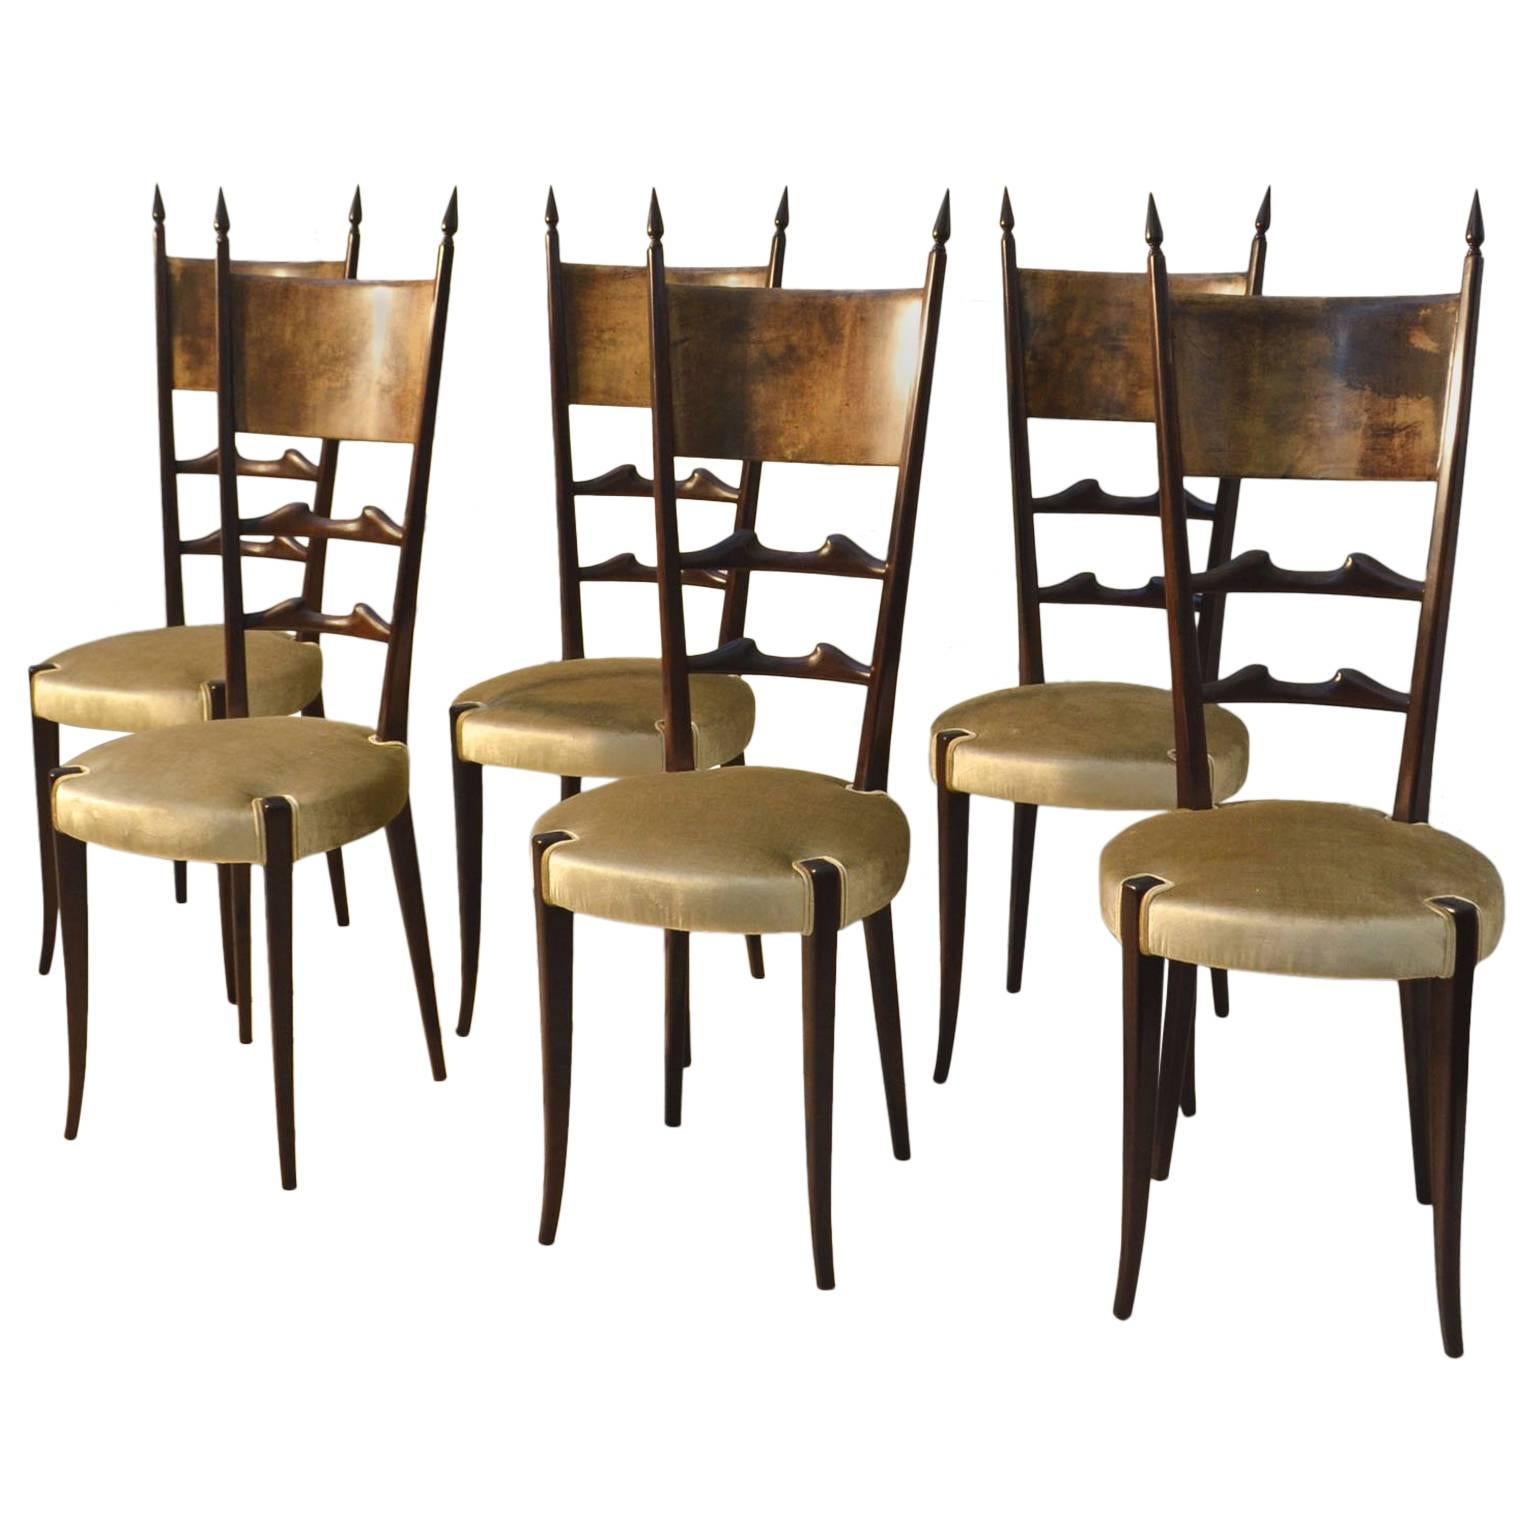 1950s Set of Six Aldo Tura Parchment and Ebonized Wood Dining Chairs